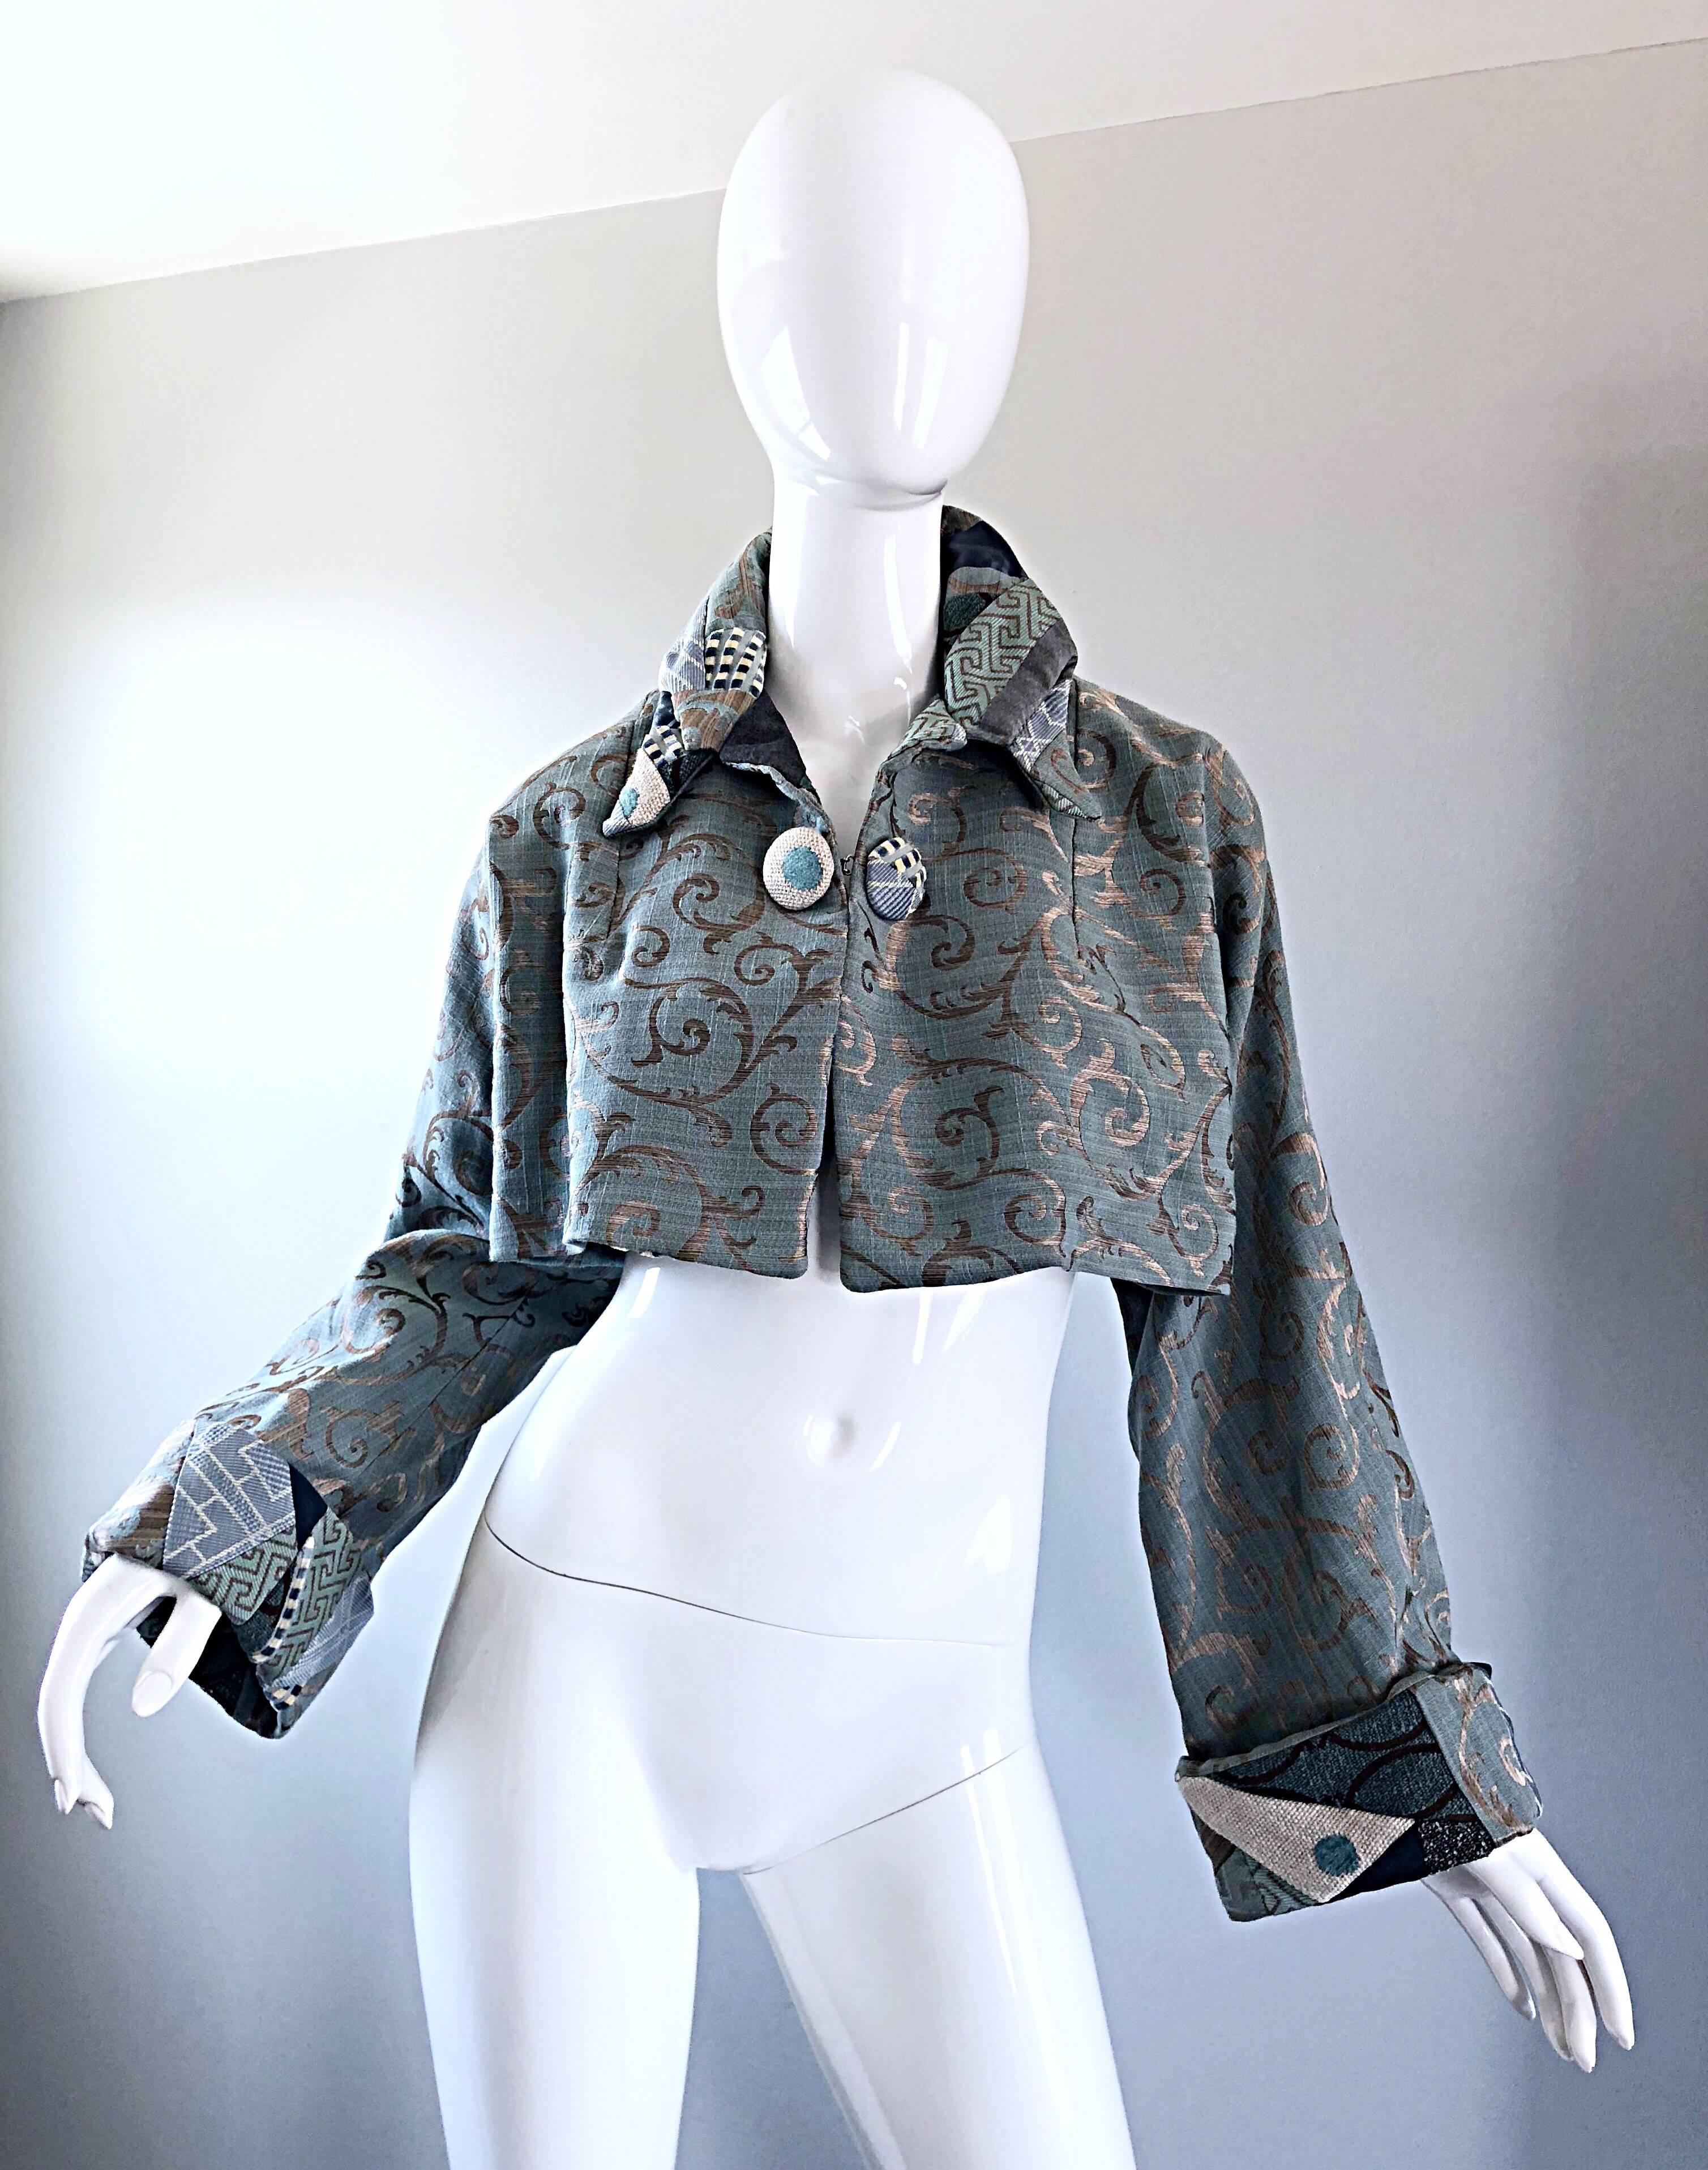 Incredible 1990s couture quality light blue and taupe baroque print silk crop bolero jacket! Trapeze like fit which flares in the back. Dolman sleeves make this gem easy to wear for an array of sizes. Beautiful sky blue color with a regal elegant